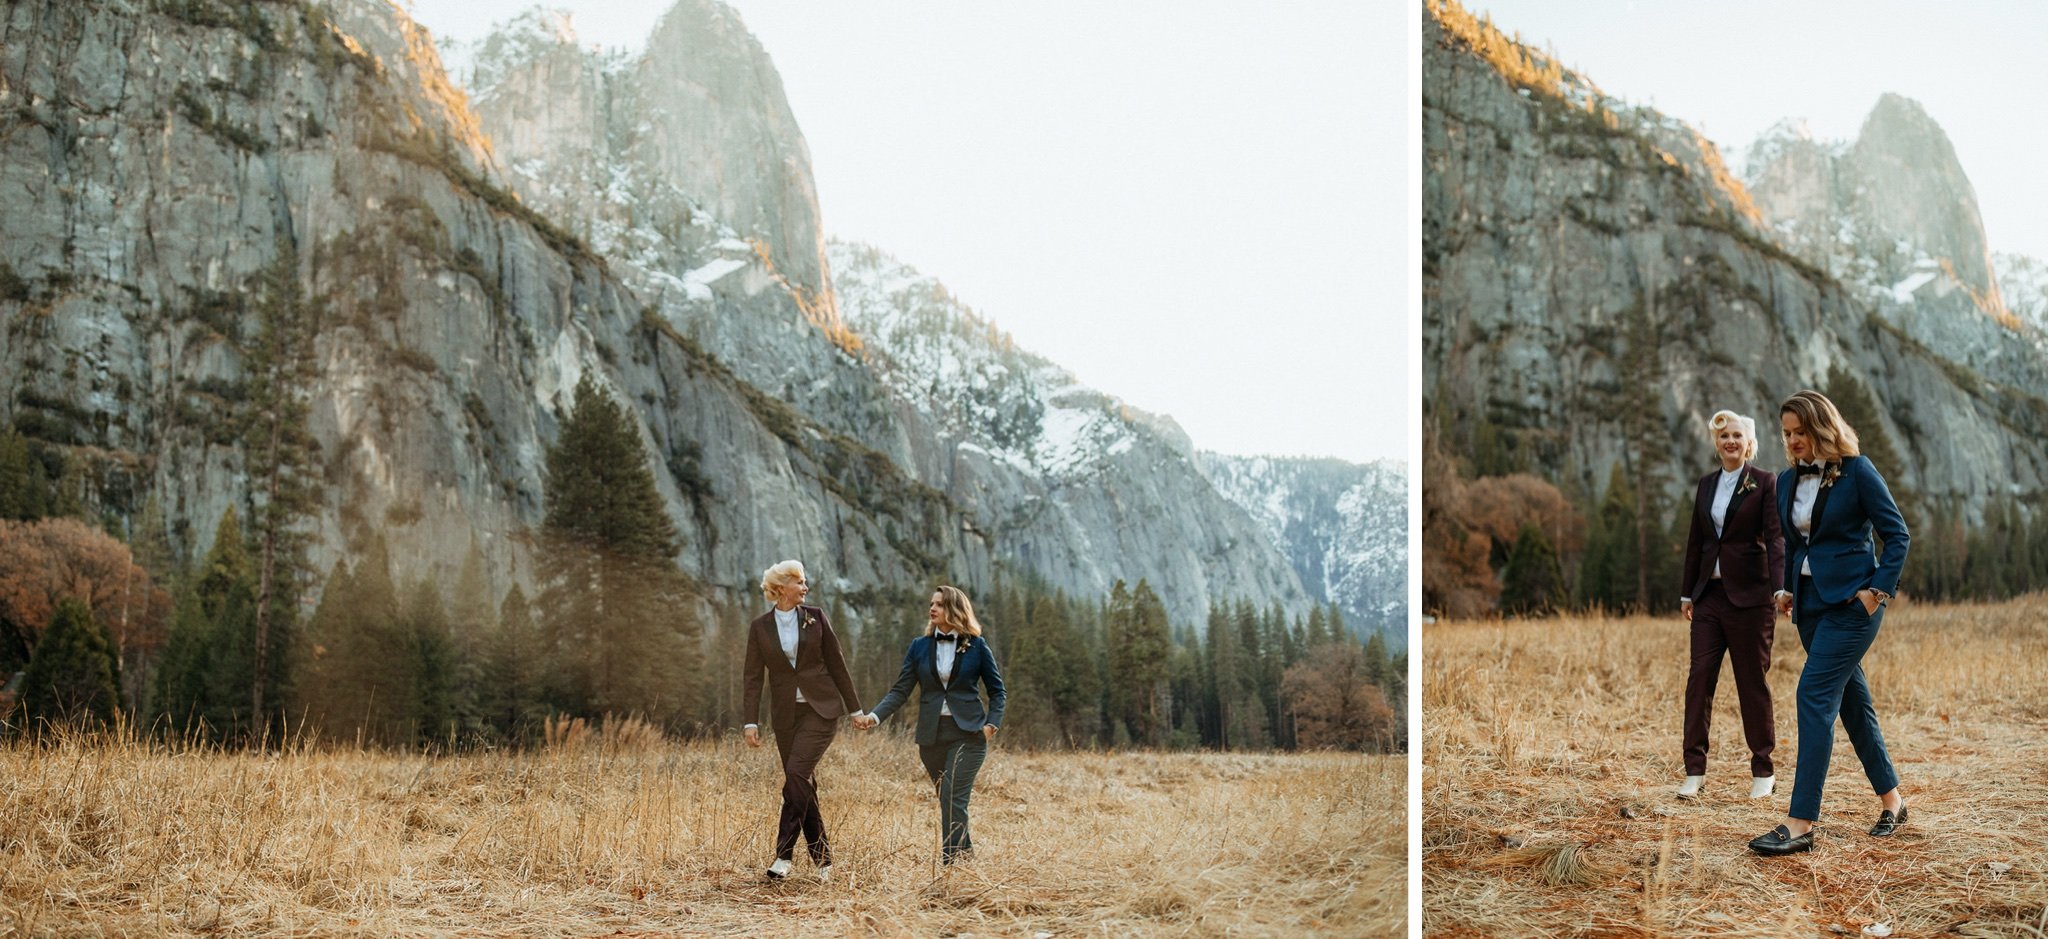 LGBT-Yosemite-National-Park-Elopement-with-Two-Brides-Will-Khoury-Elopement-Photographer_66.jpg